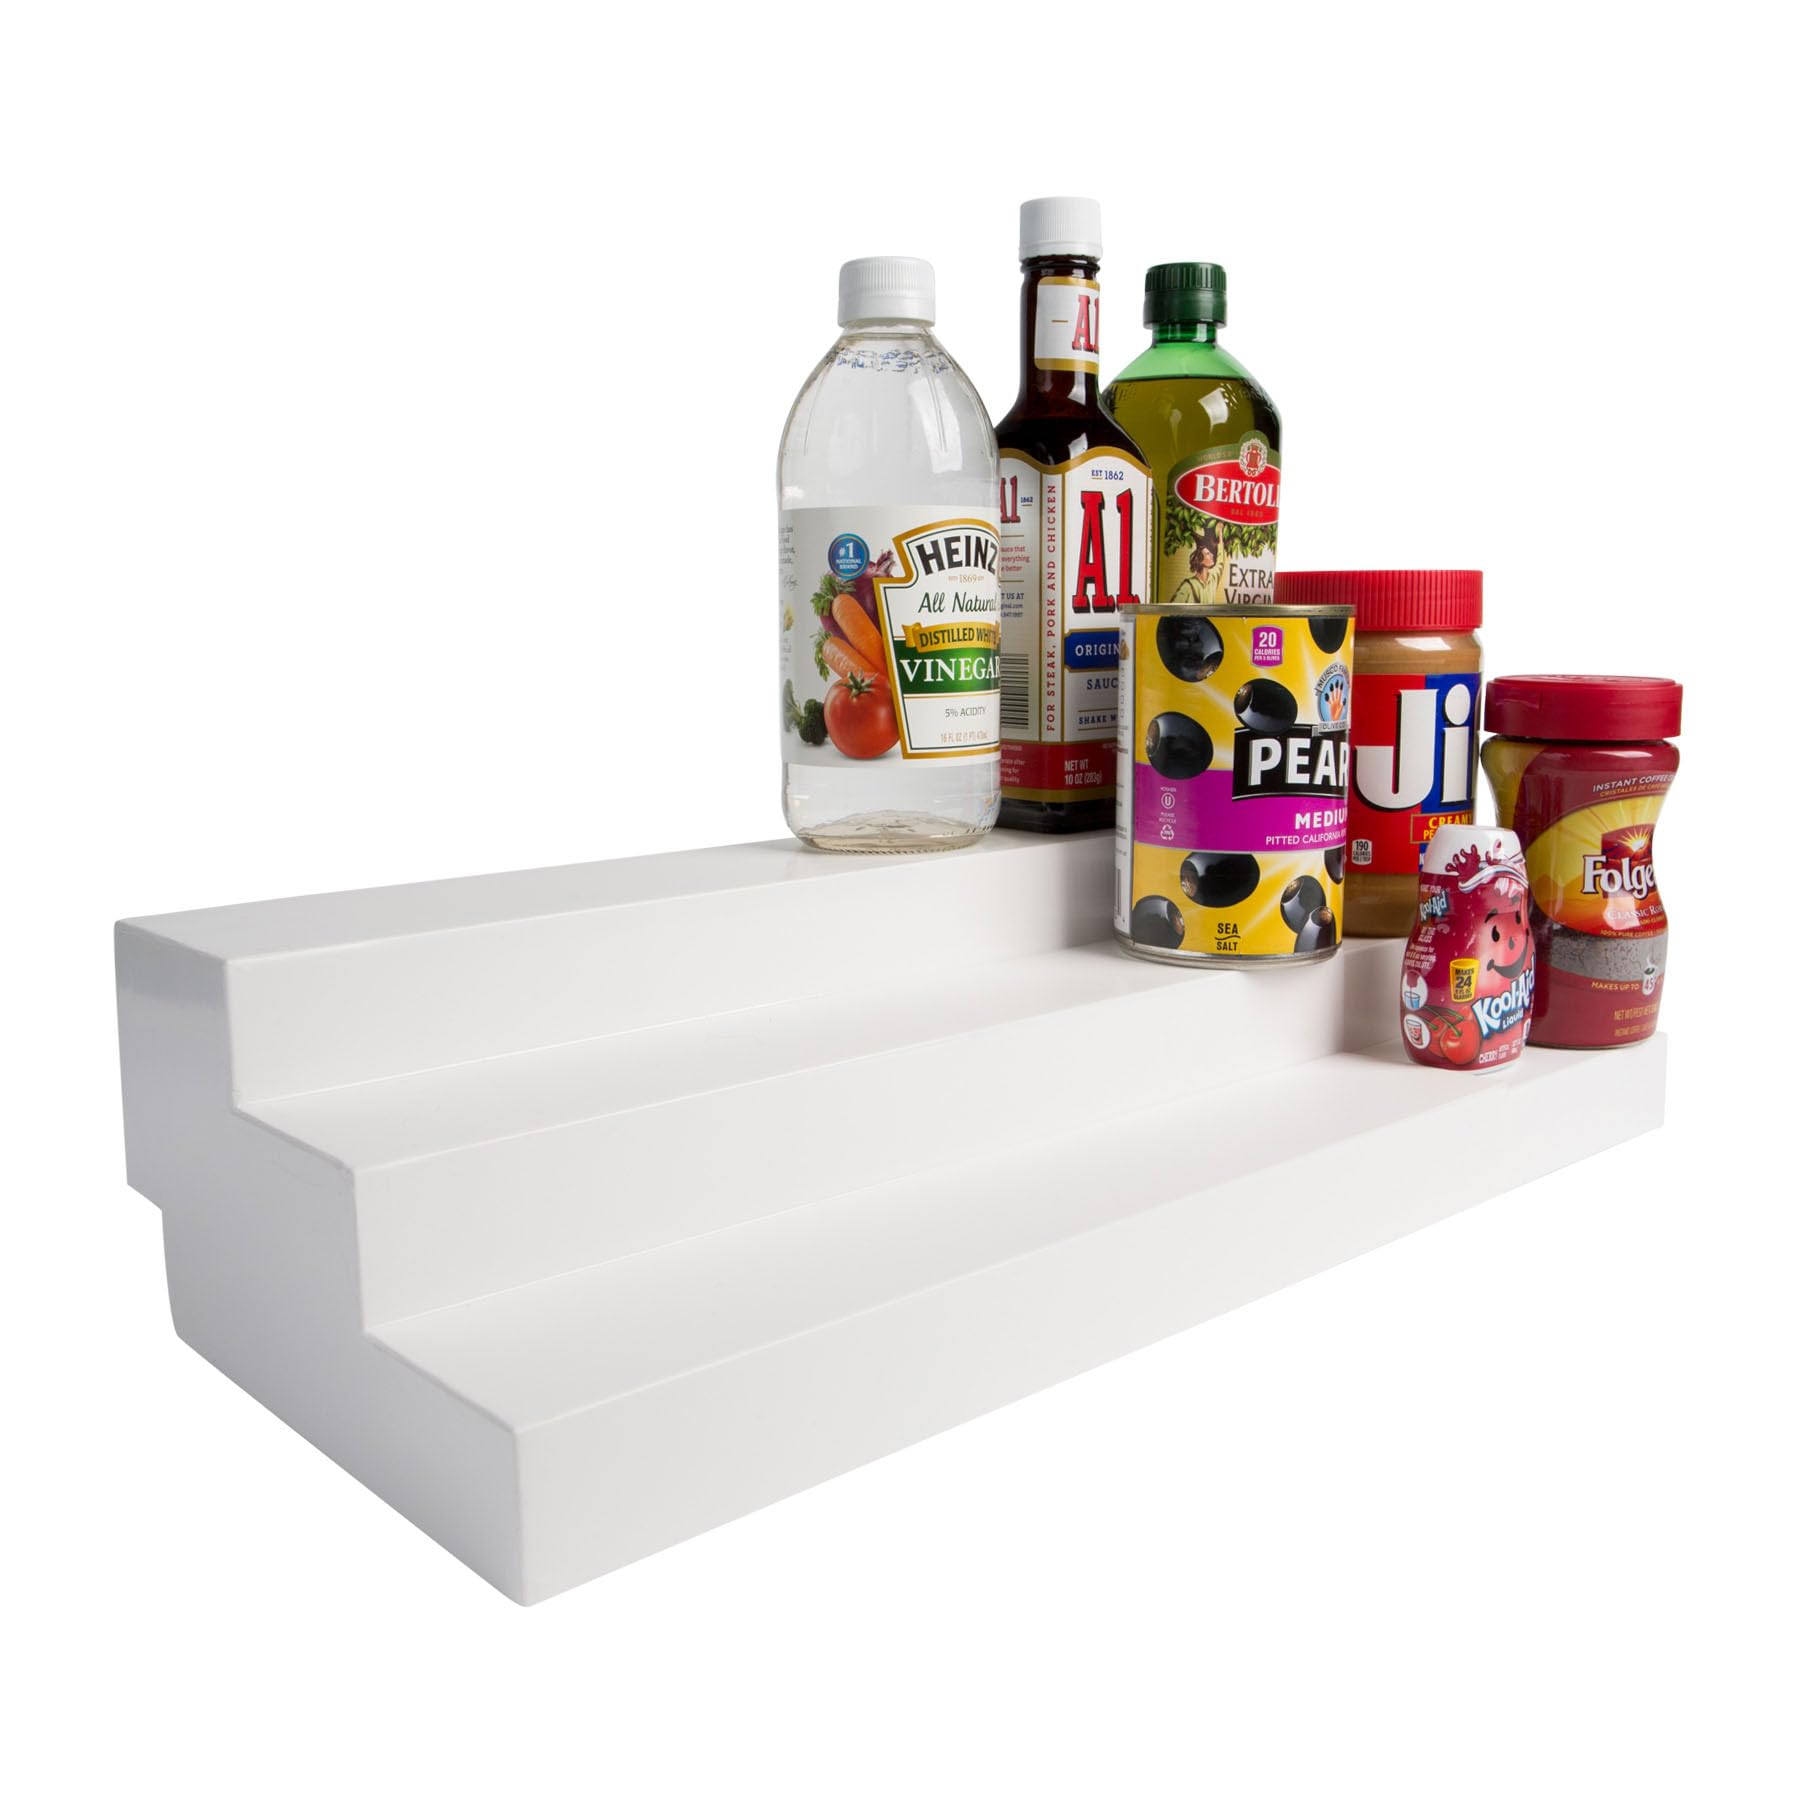 Dial Industries 3 Tiered Adjustable Canned Goods Shelves for Kitchen Cabinet and Pantry Organization, Expand A Shelf